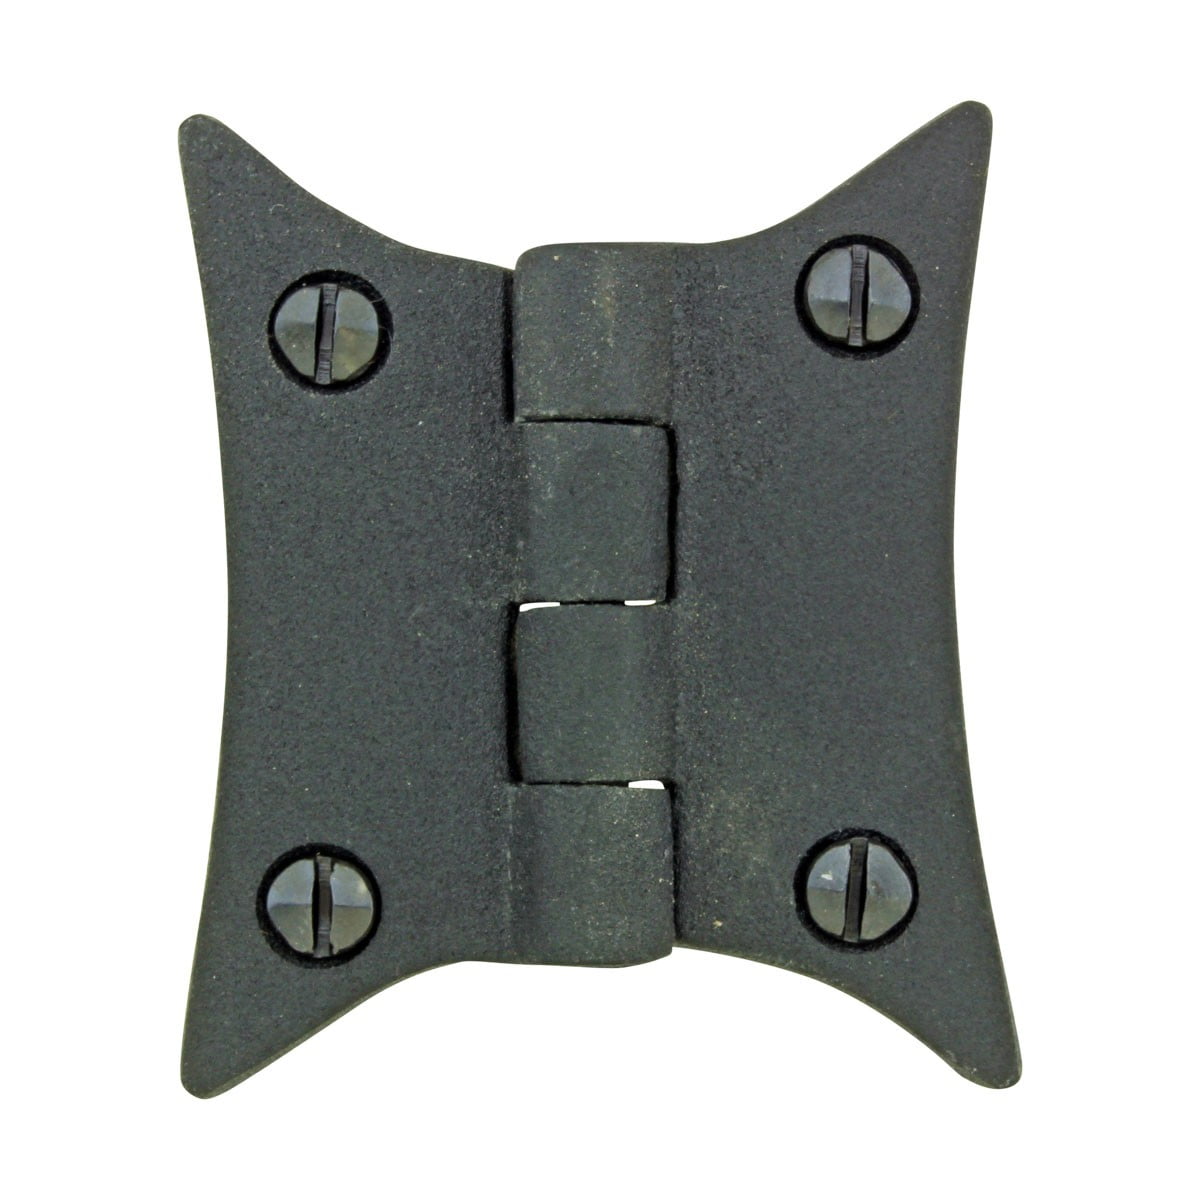 Screws 2 x Sets of COUNTERFLAP LATCHES with 2 Back Flap Hinges PER Set 